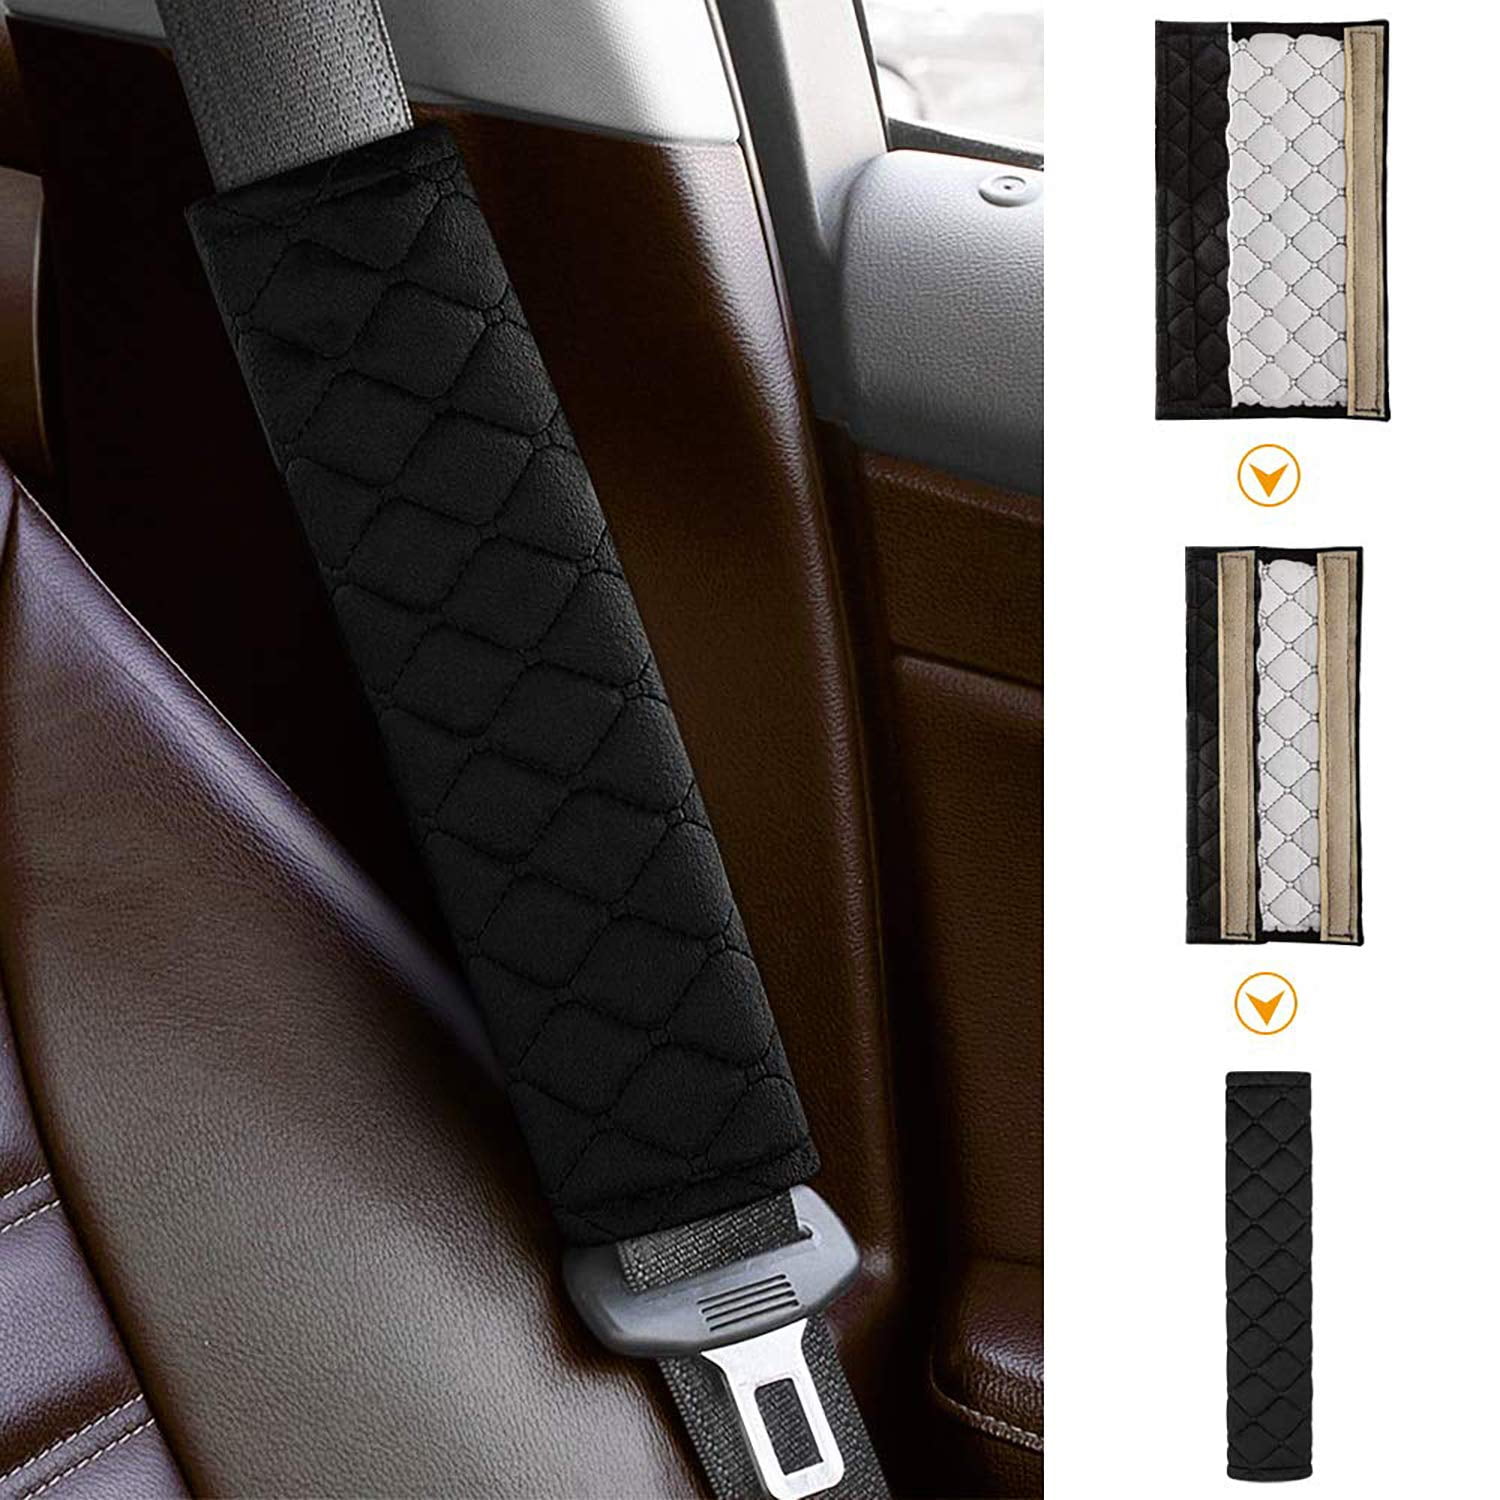 Black Car Safety Seat Belt Shoulder Comfortable Harness Pads Covers Cushion FG 